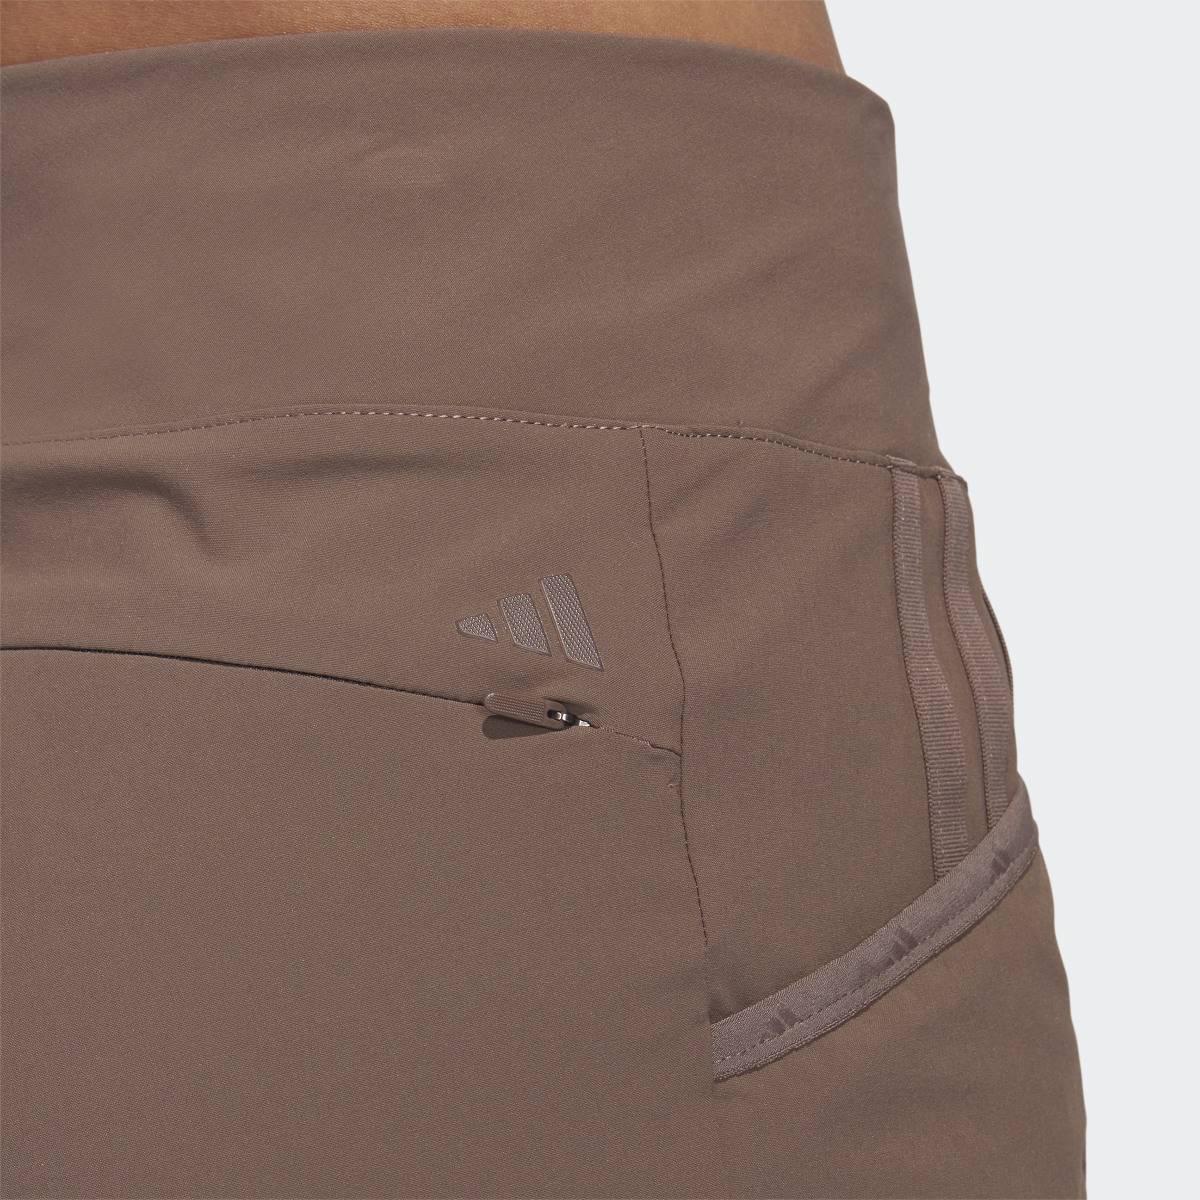 Adidas Ultimate365 Tour Pull-On Golf Ankle Pants. 7